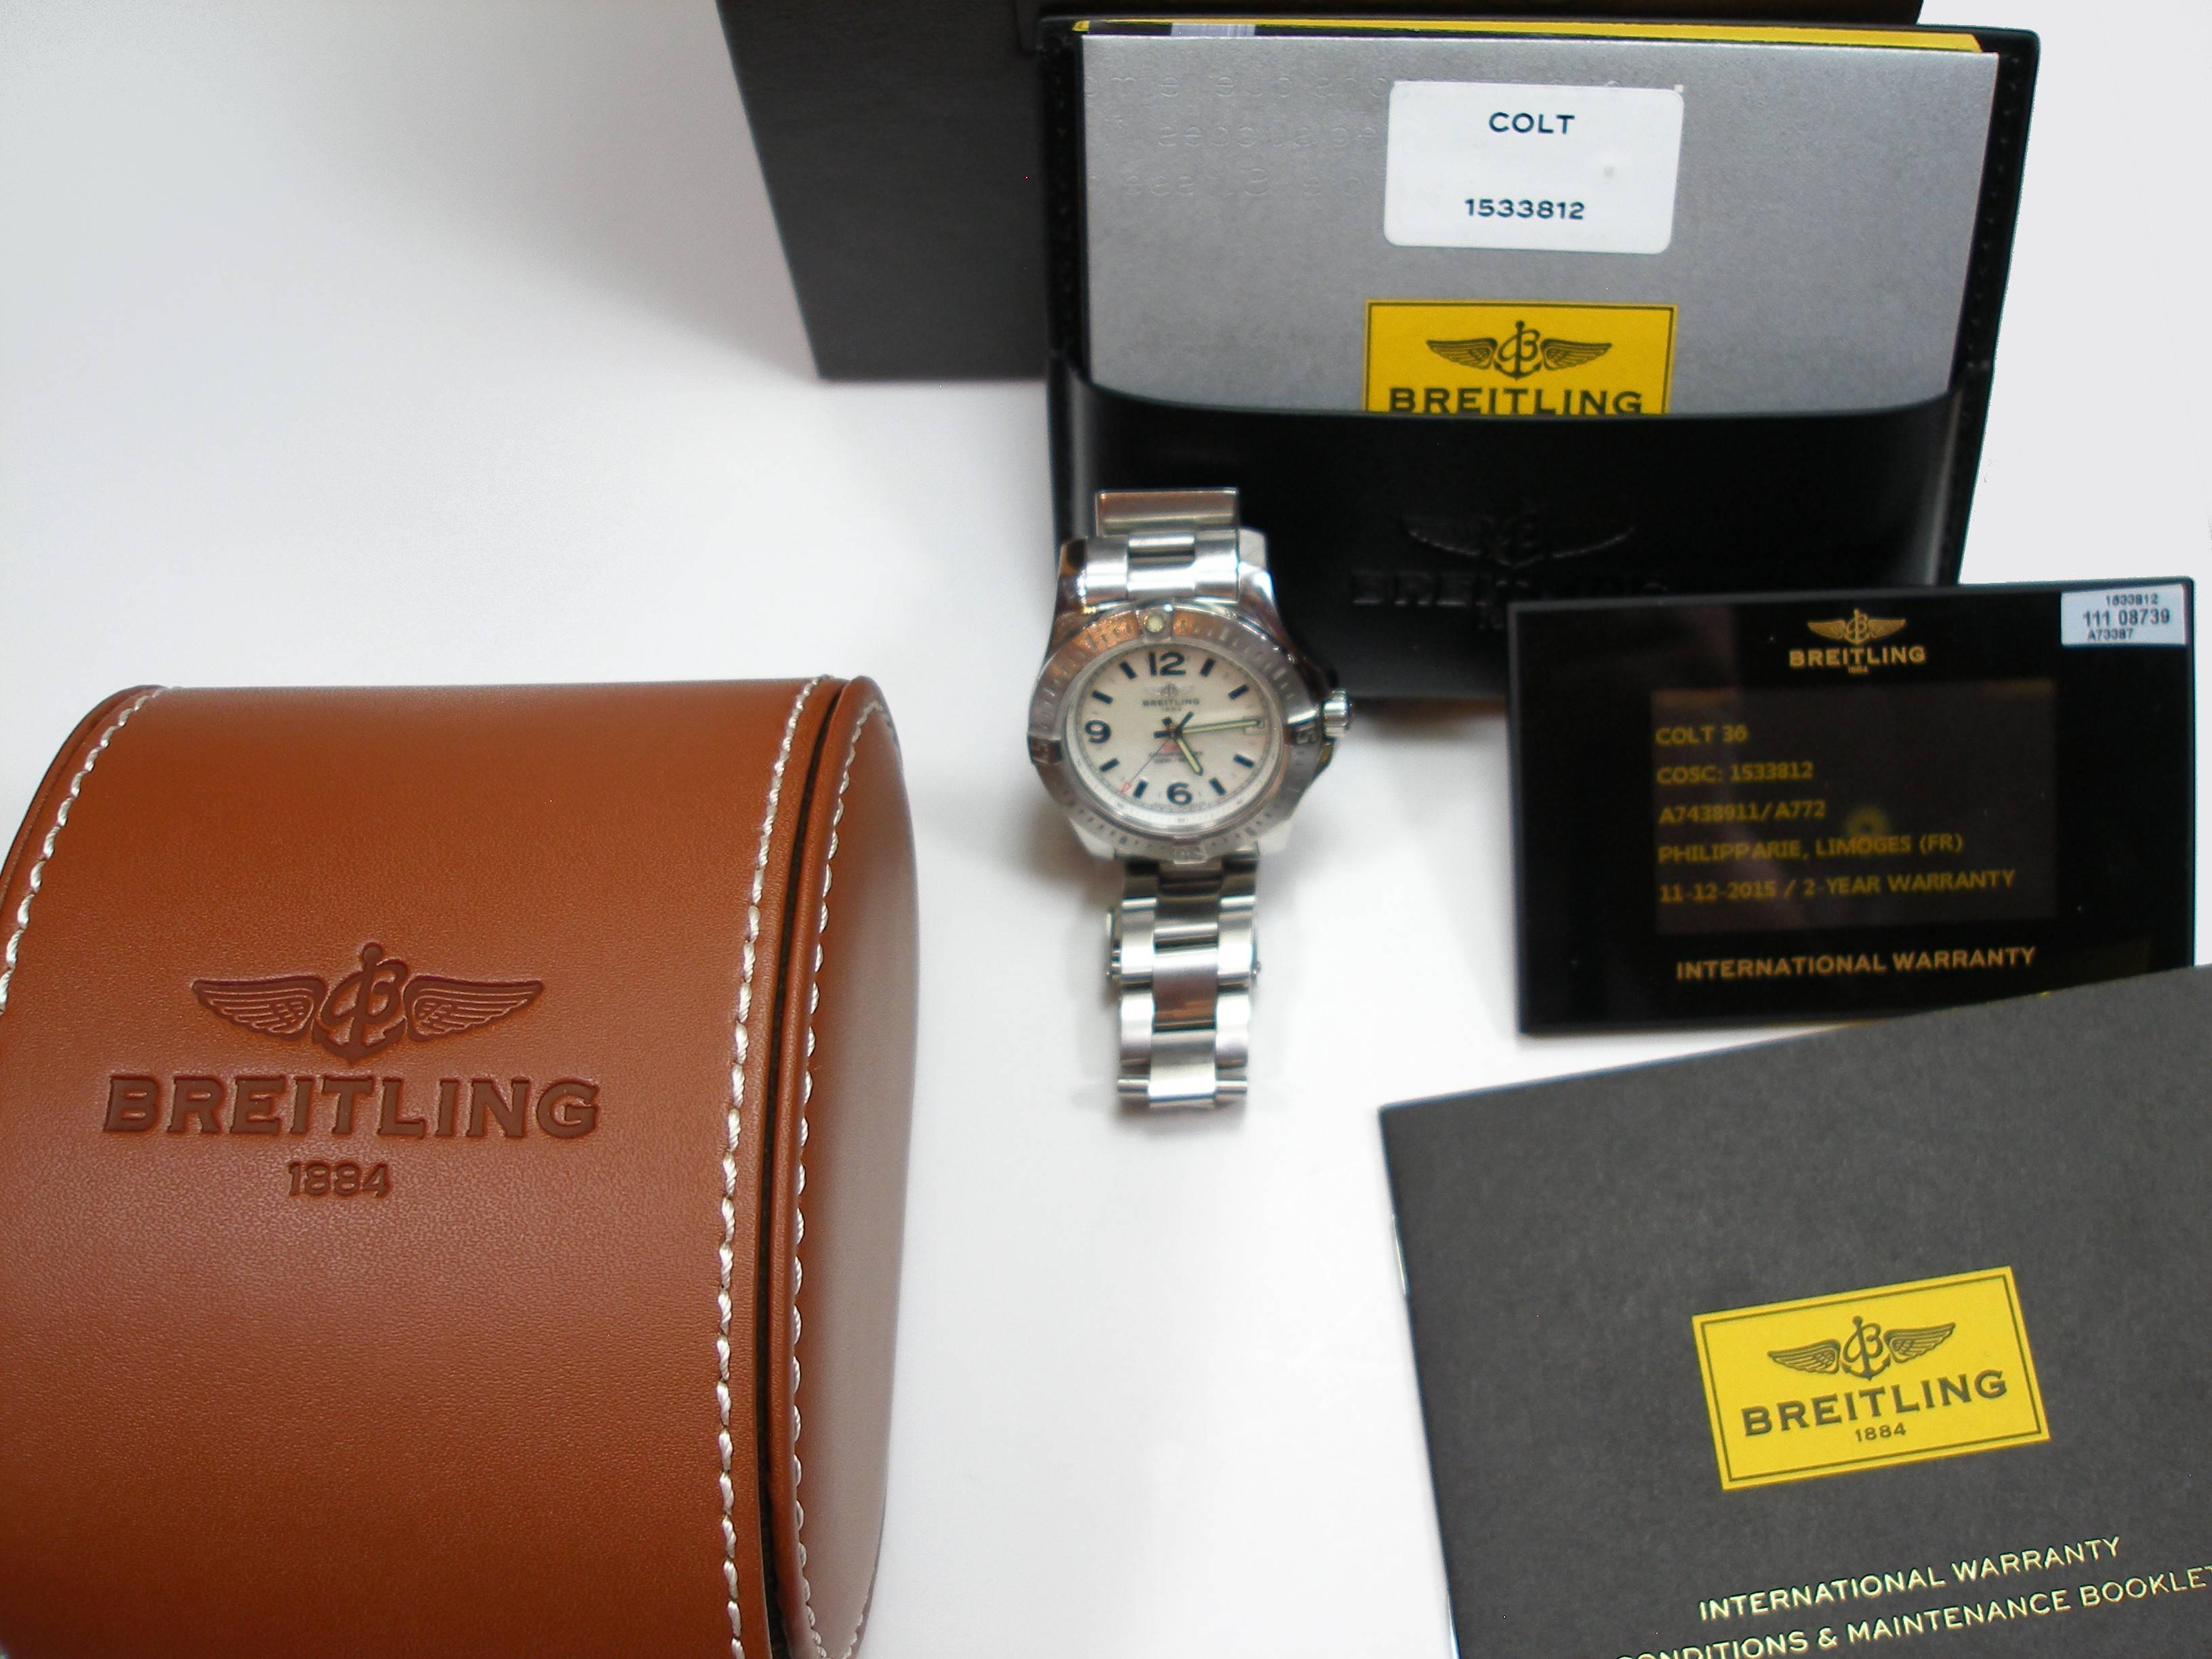 Nice and classique Breitling Colt 36
Order 11/12/2015 in Philipparie Joaillier in Limoges city 
Good condition 
Please note : some normal wear marks on the metal bracelet and case.
Please look at the pictures 
the warranty just ended at